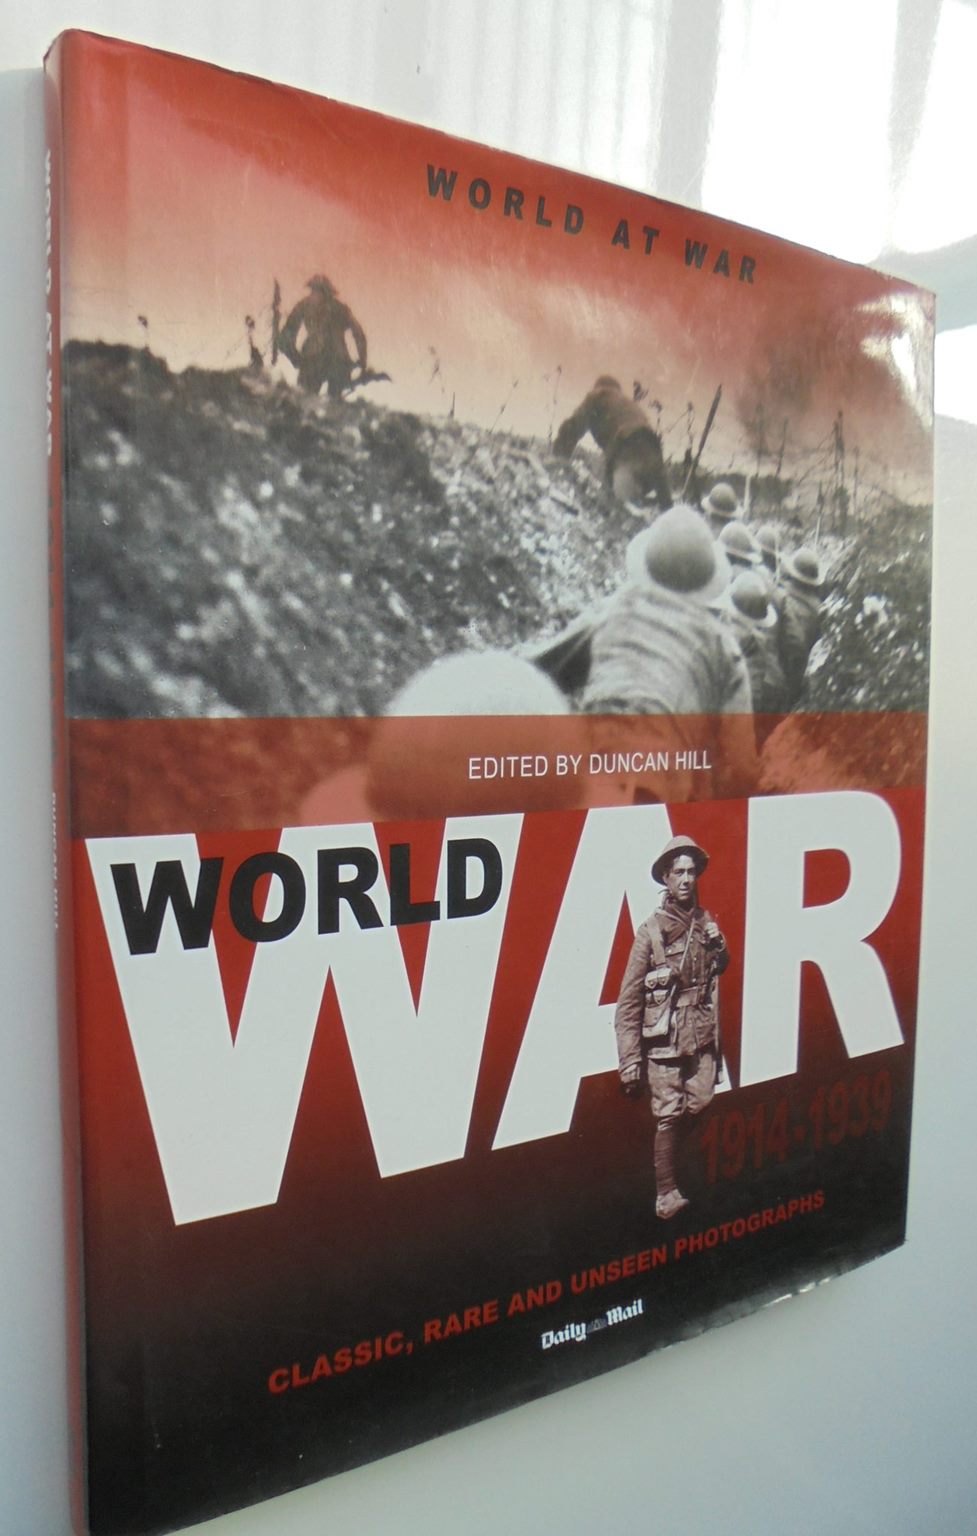 World at War - Classic, Rare and Unseen Photographs 1914 - 1939. By Duncan Hill